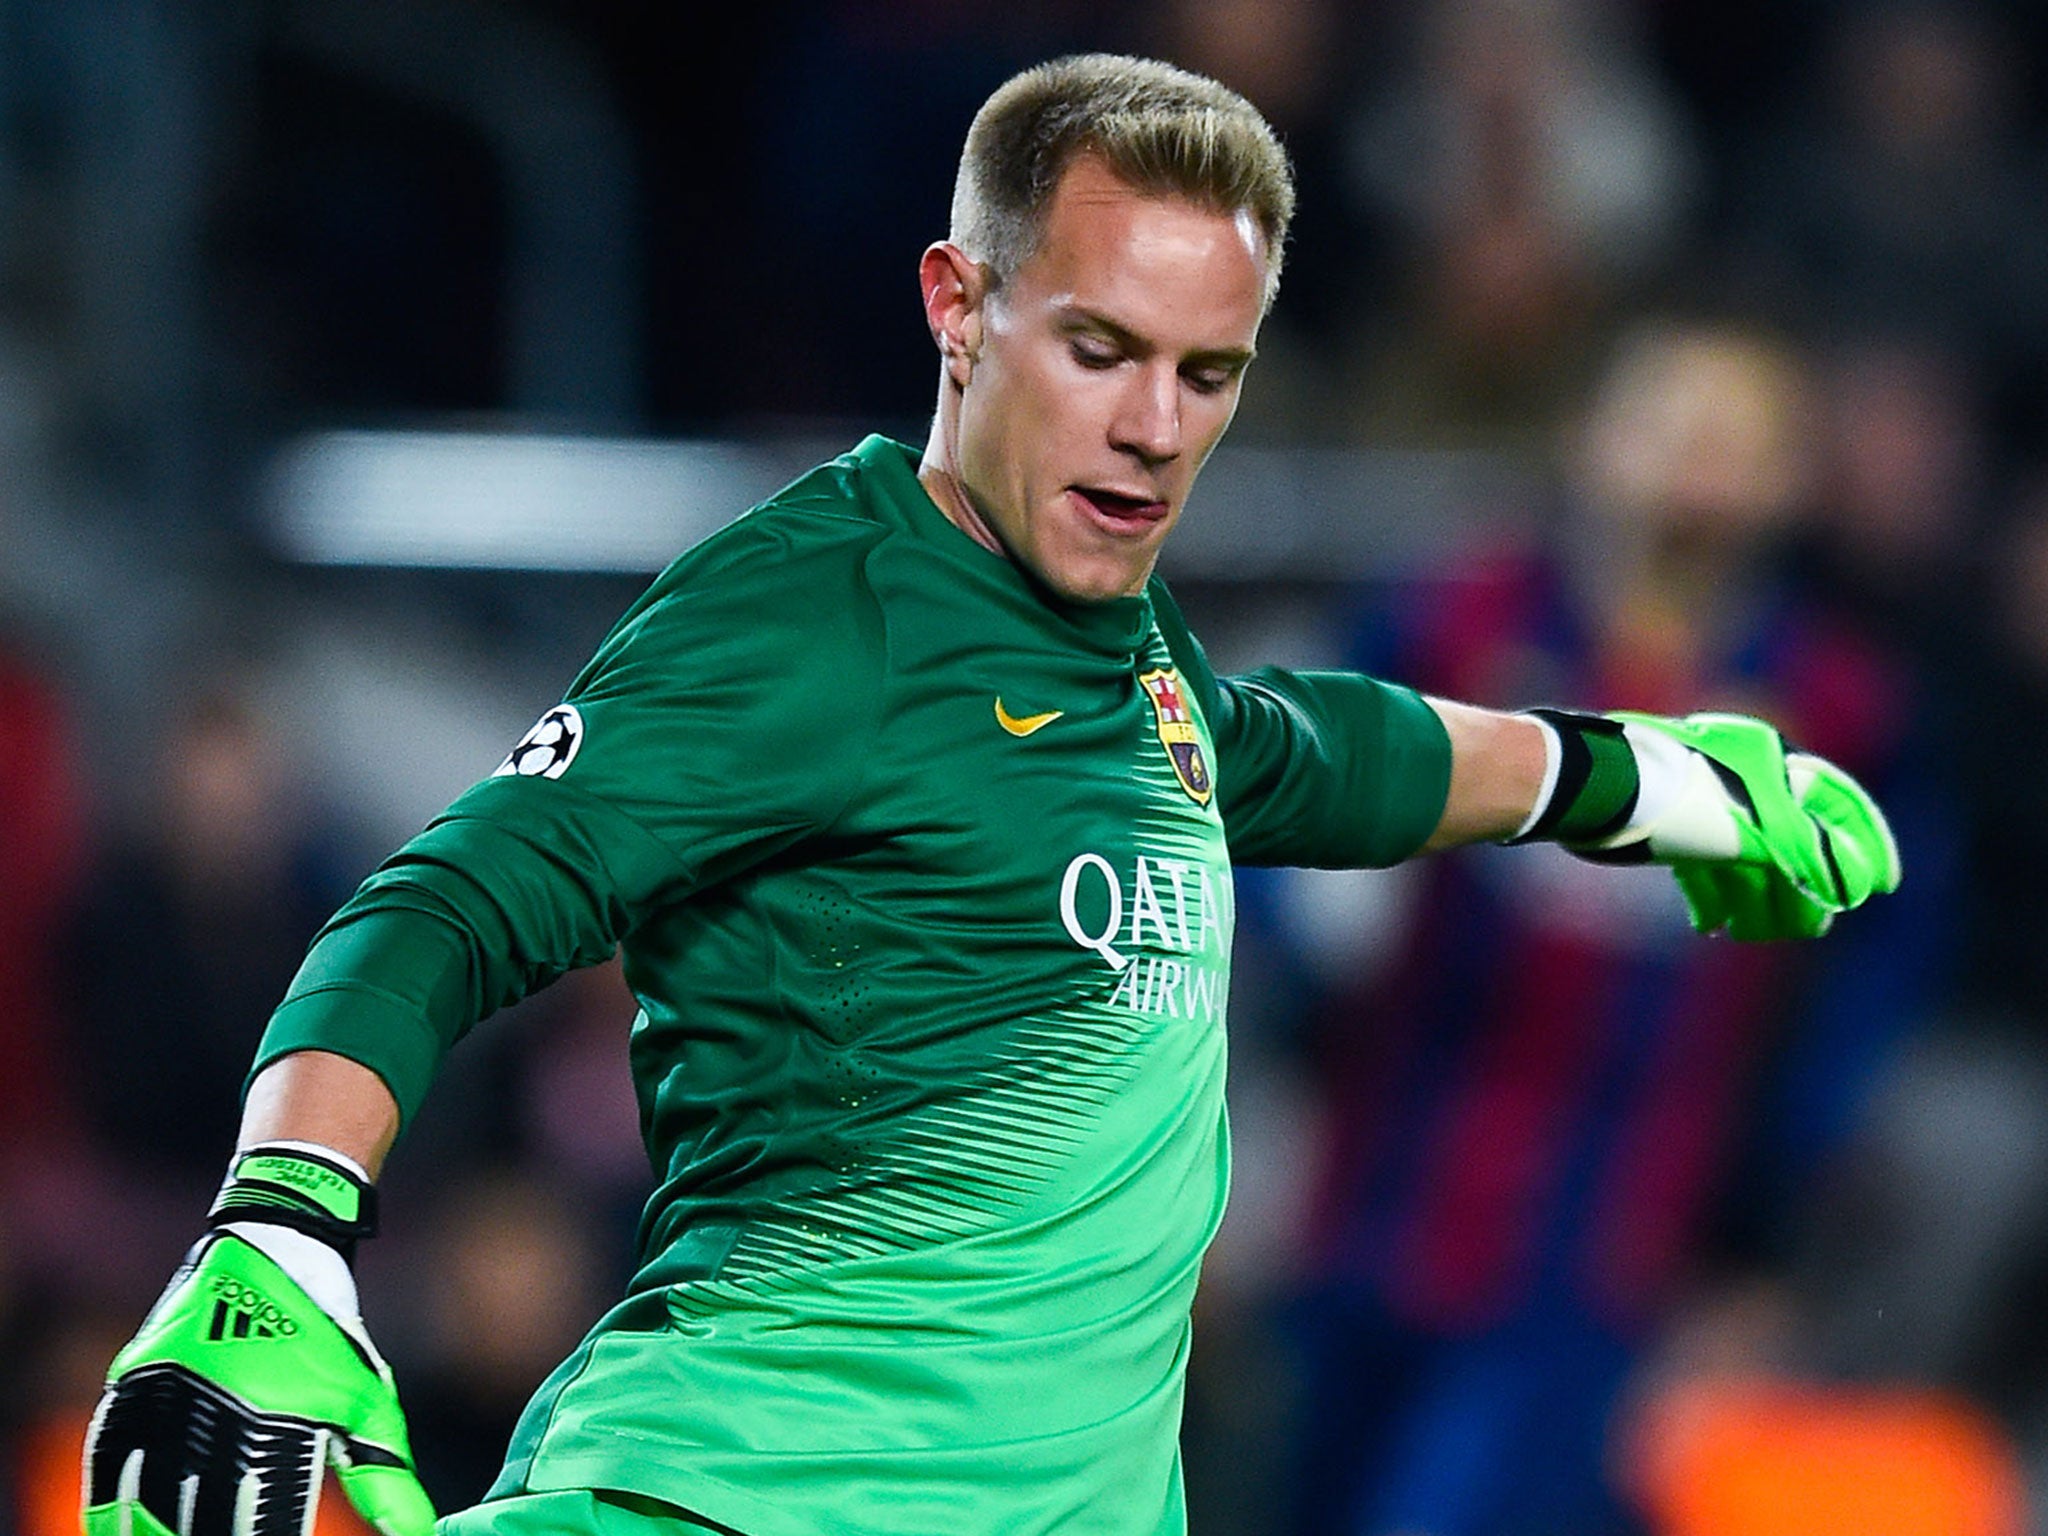 Marc-Andre ter Stegen could be in line for a loan to Liverpool